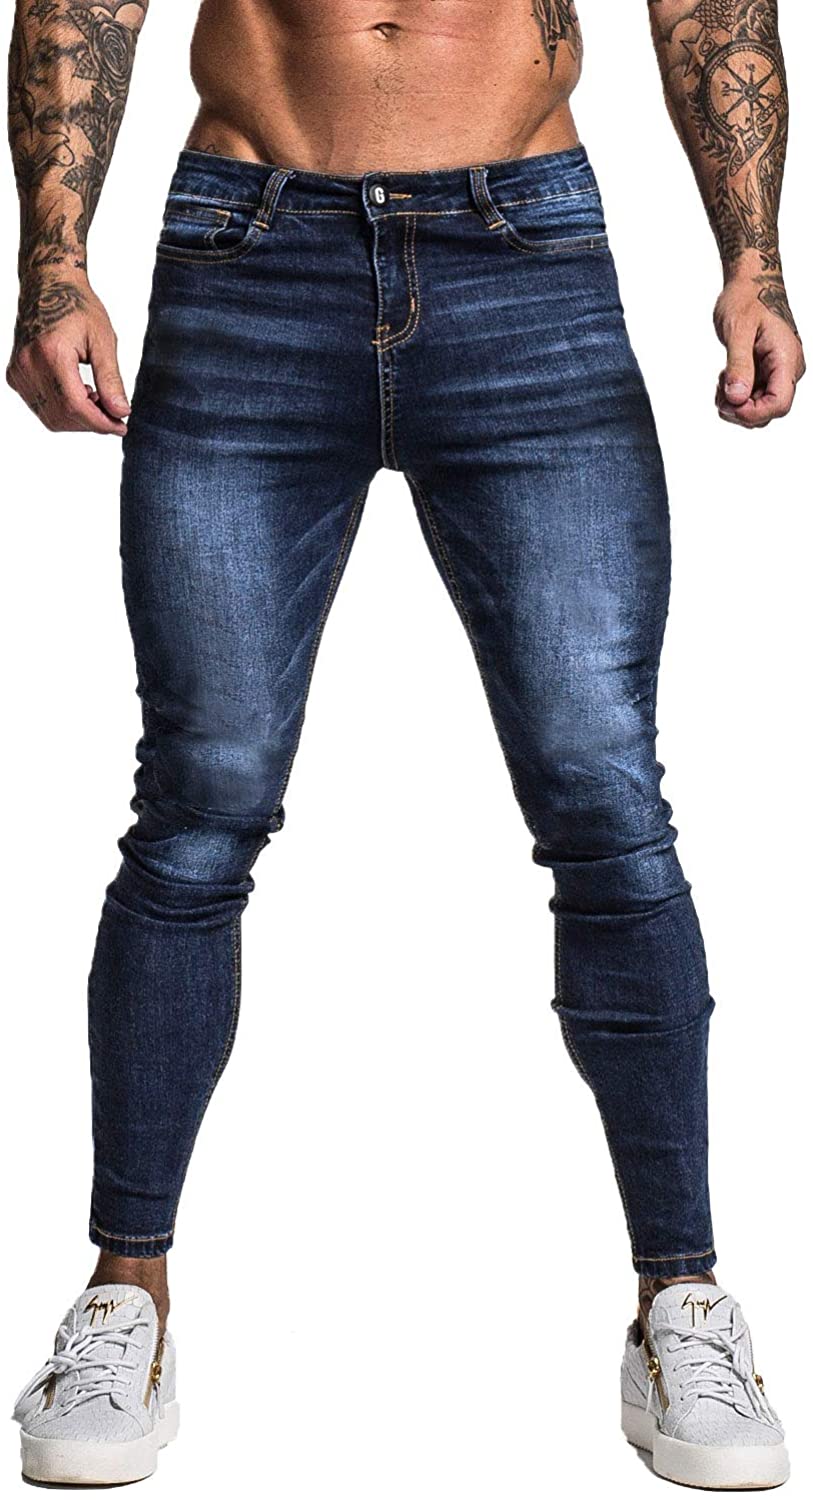 GINGTTO Men's Skinny Jeans Stretch Ripped Tapered Leg | eBay